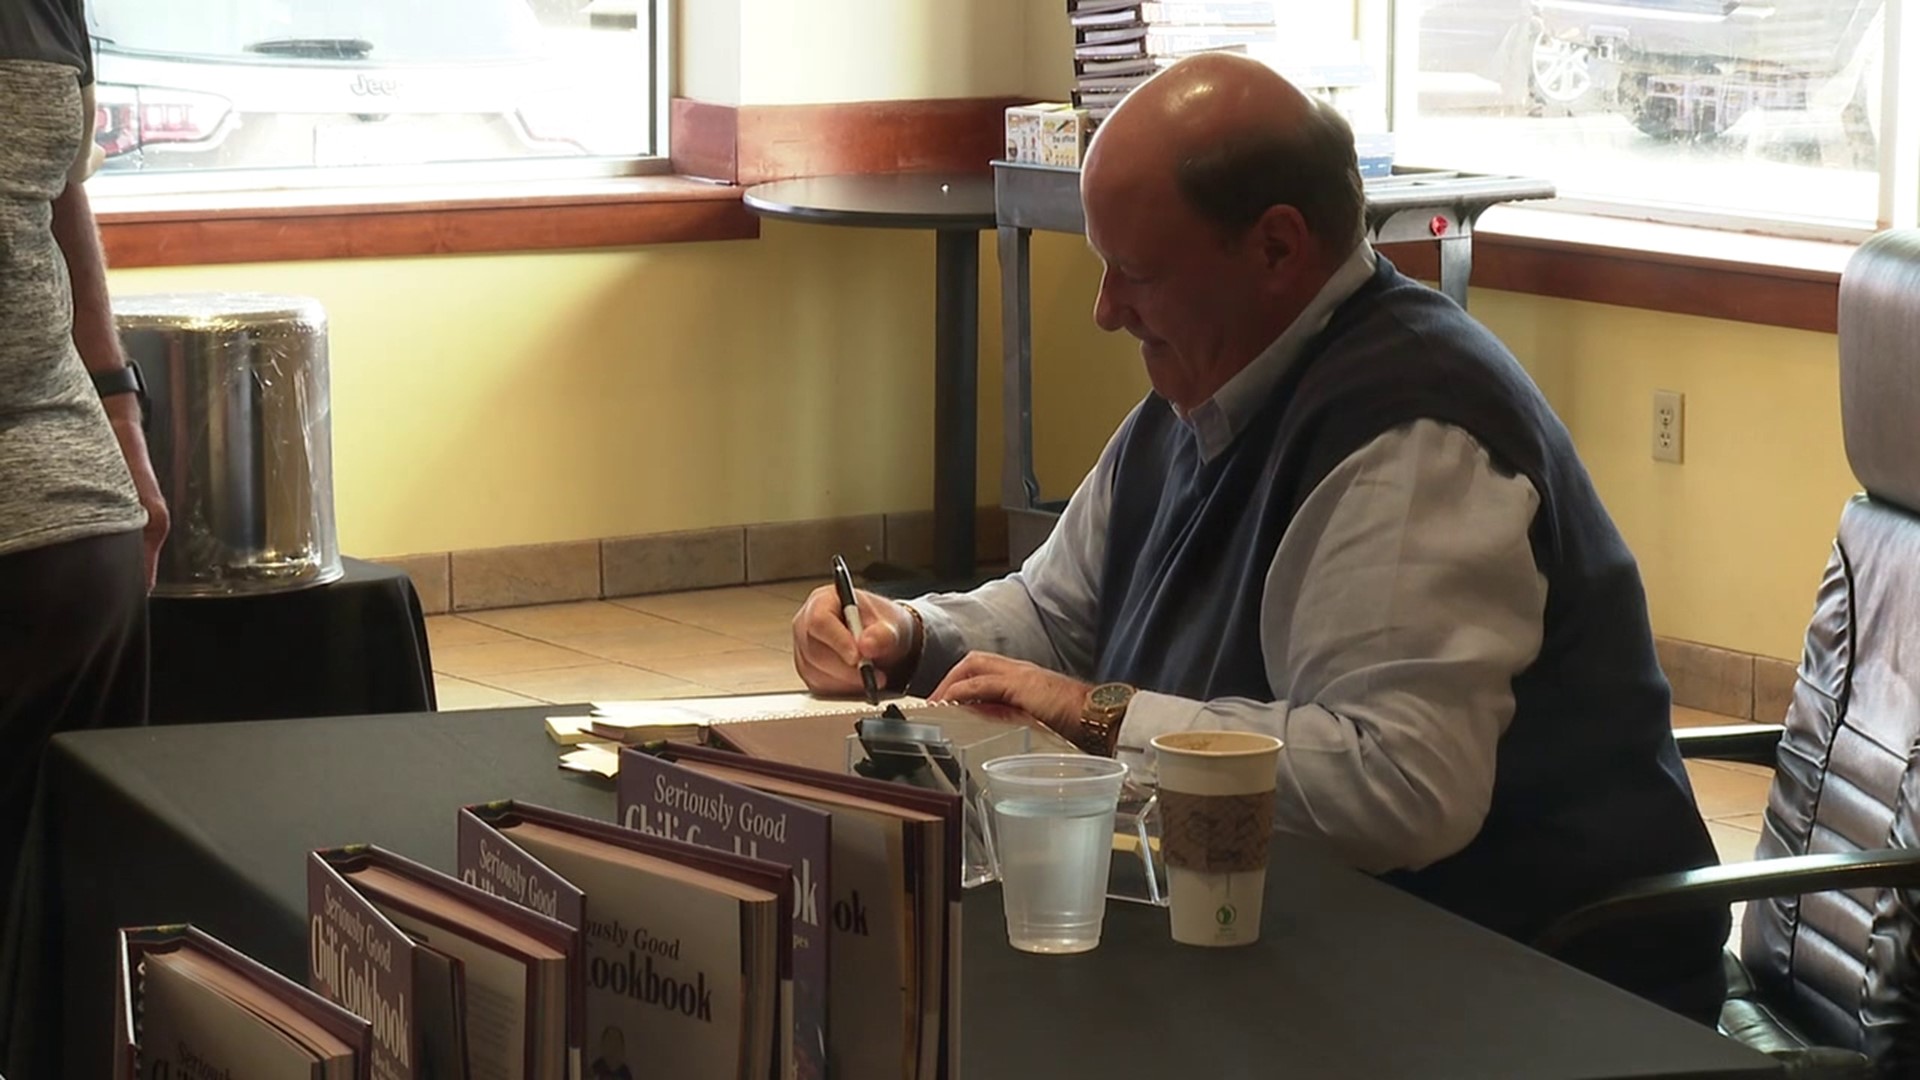 Brian Baumgartner made a stop Friday afternoon at Books-a-Million in Dickson City to sign copies of his new chili cookbook.